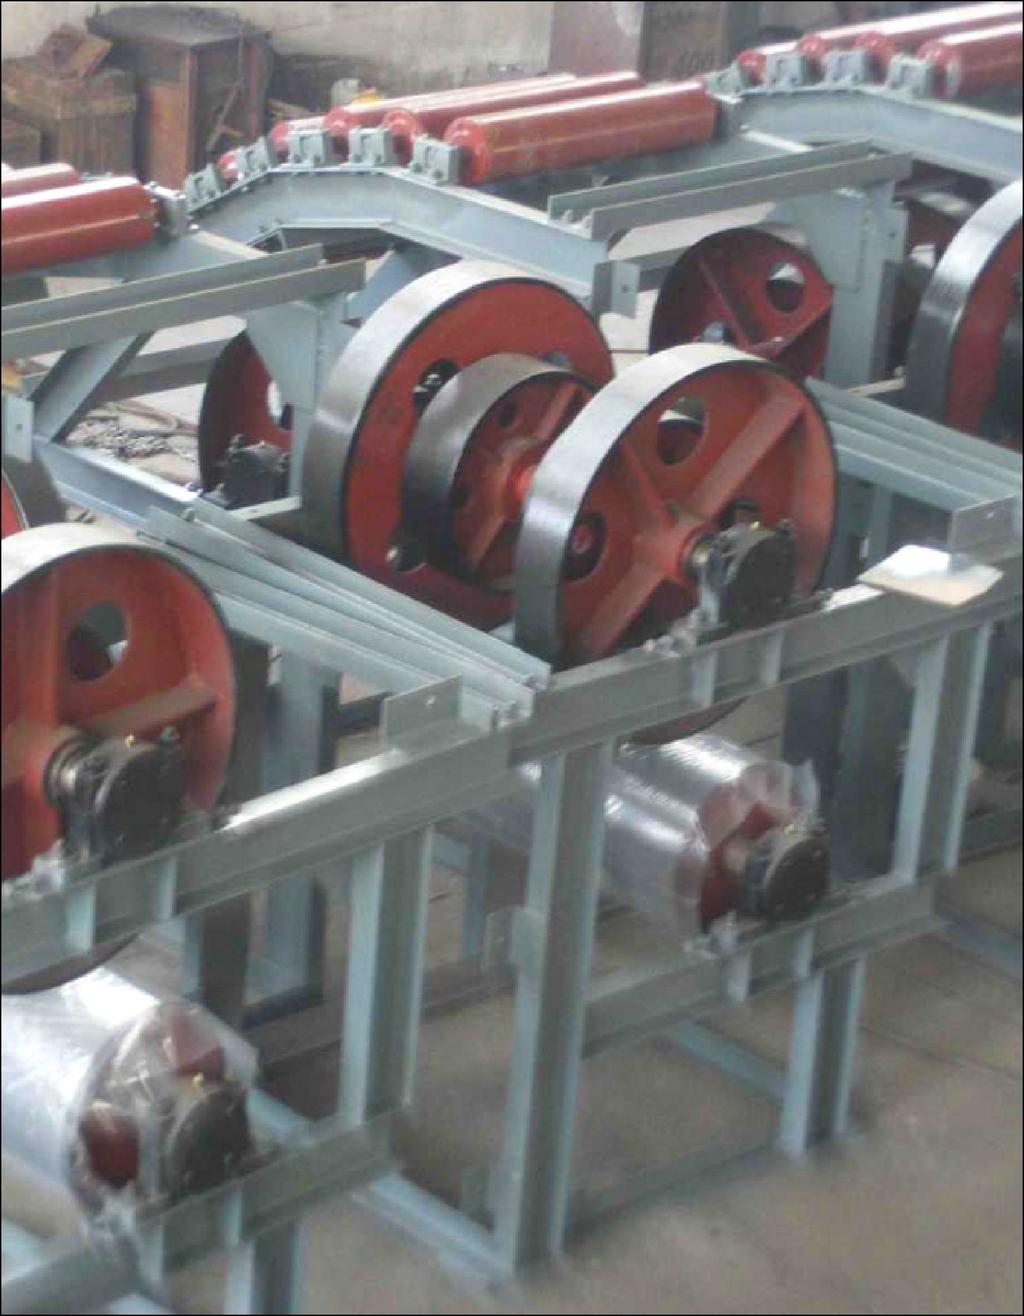 However, on some large belts, due to the type of tensile and cross-stabilizing members, it is not advisable to crown the pulley as damage may result to the base belt.